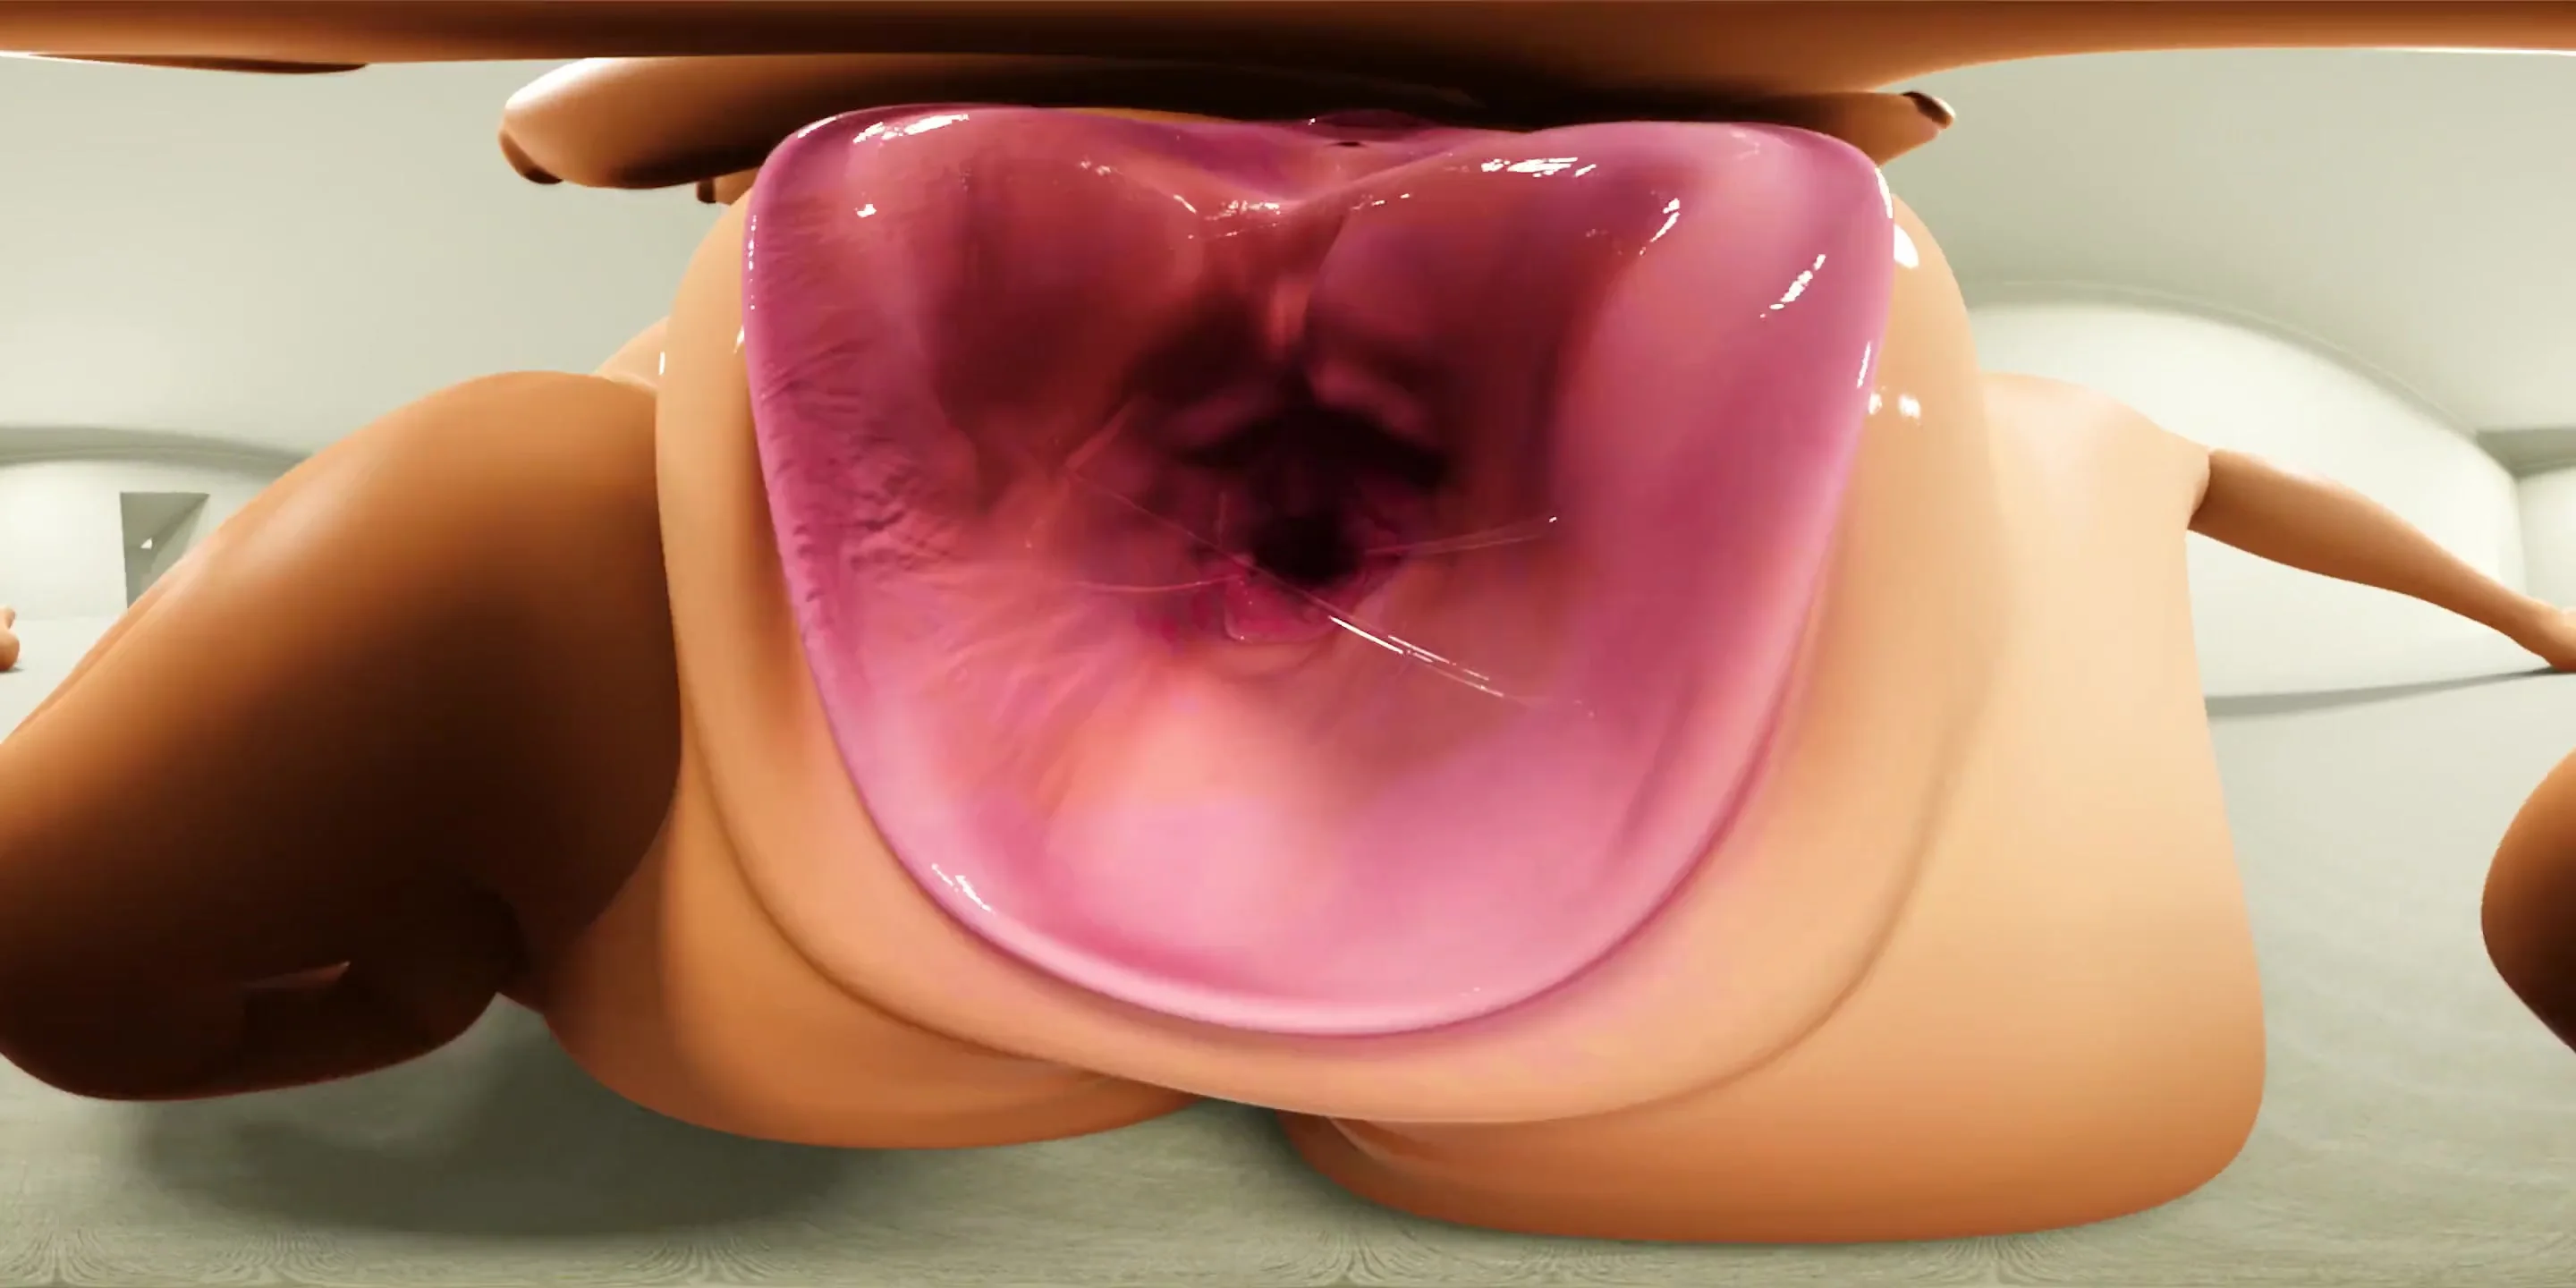 Mia 3D swallowed you (VR) - ThisVid.com